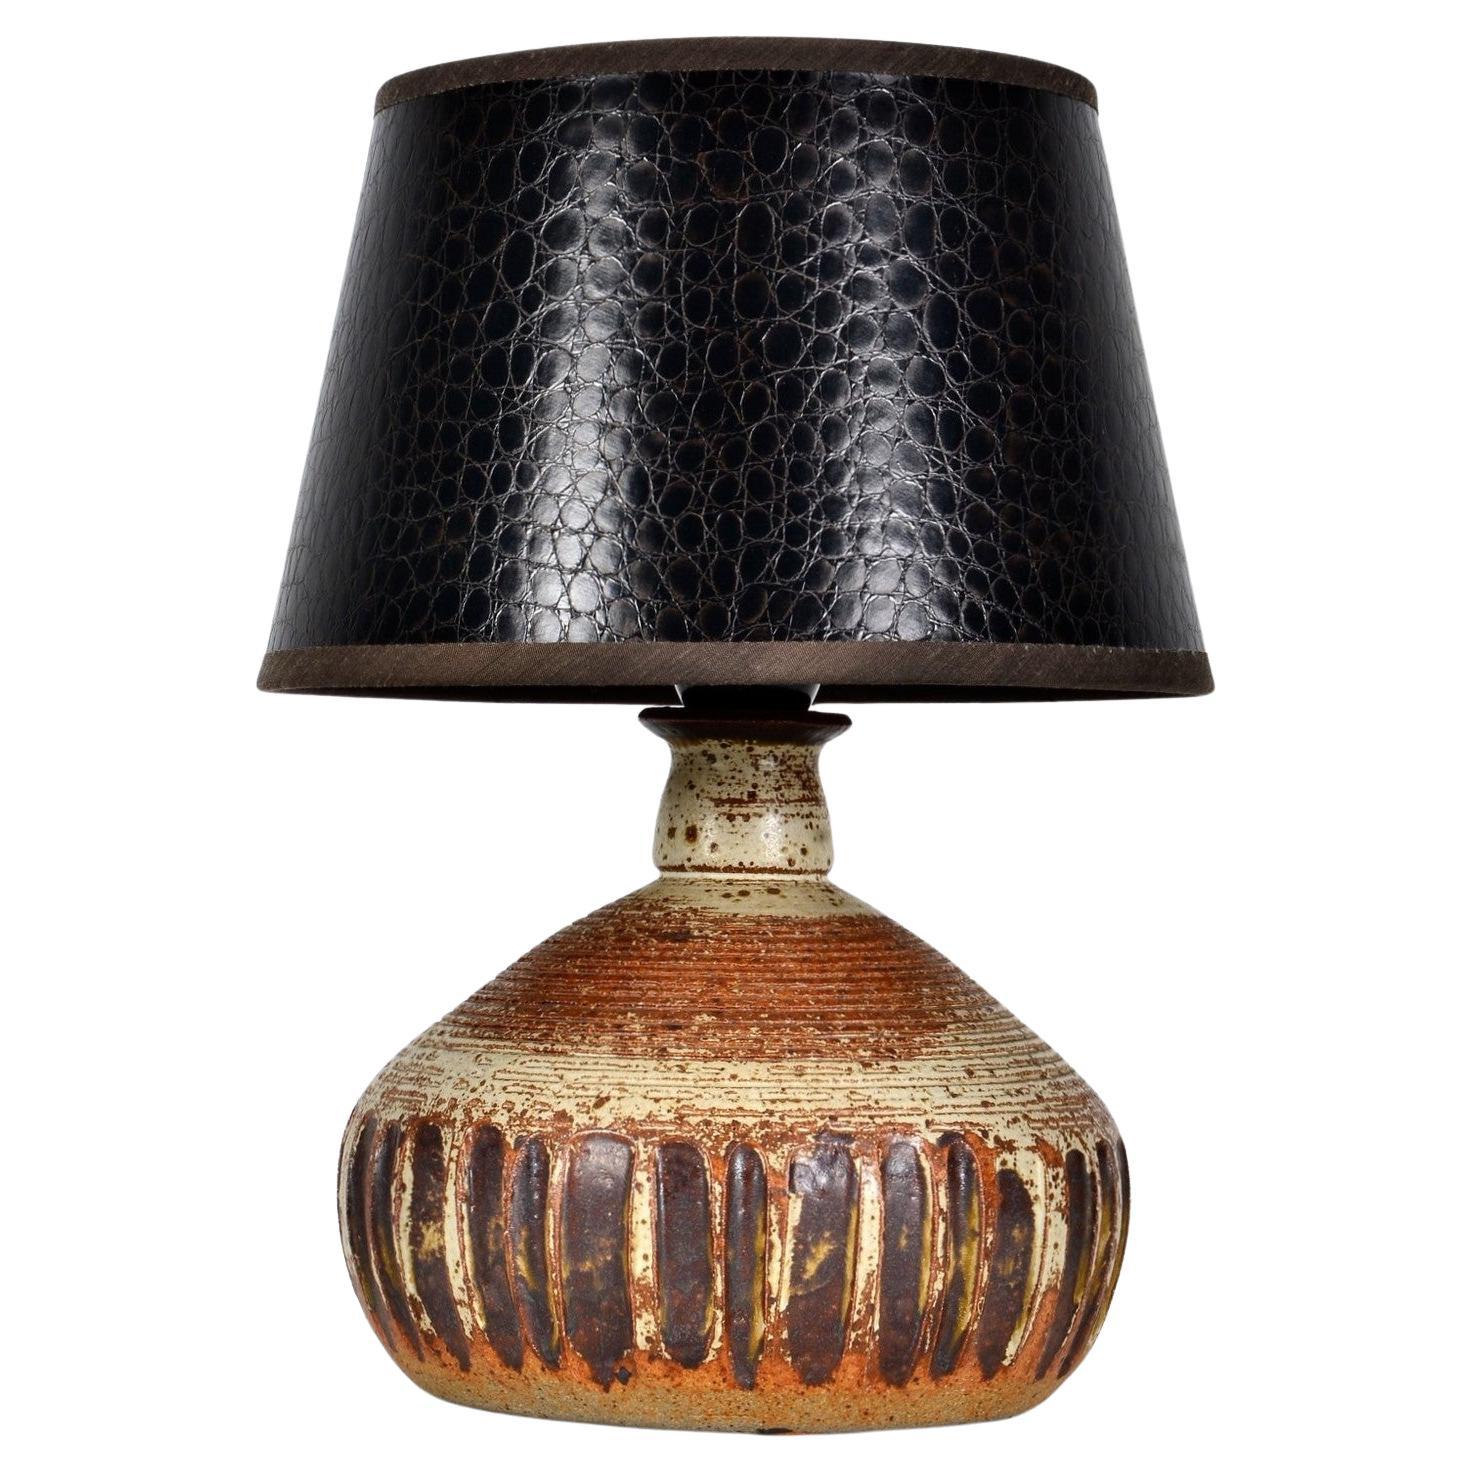 Danish Hand-Crafted Ceramic Table Lamp, Denmark, 1960s For Sale